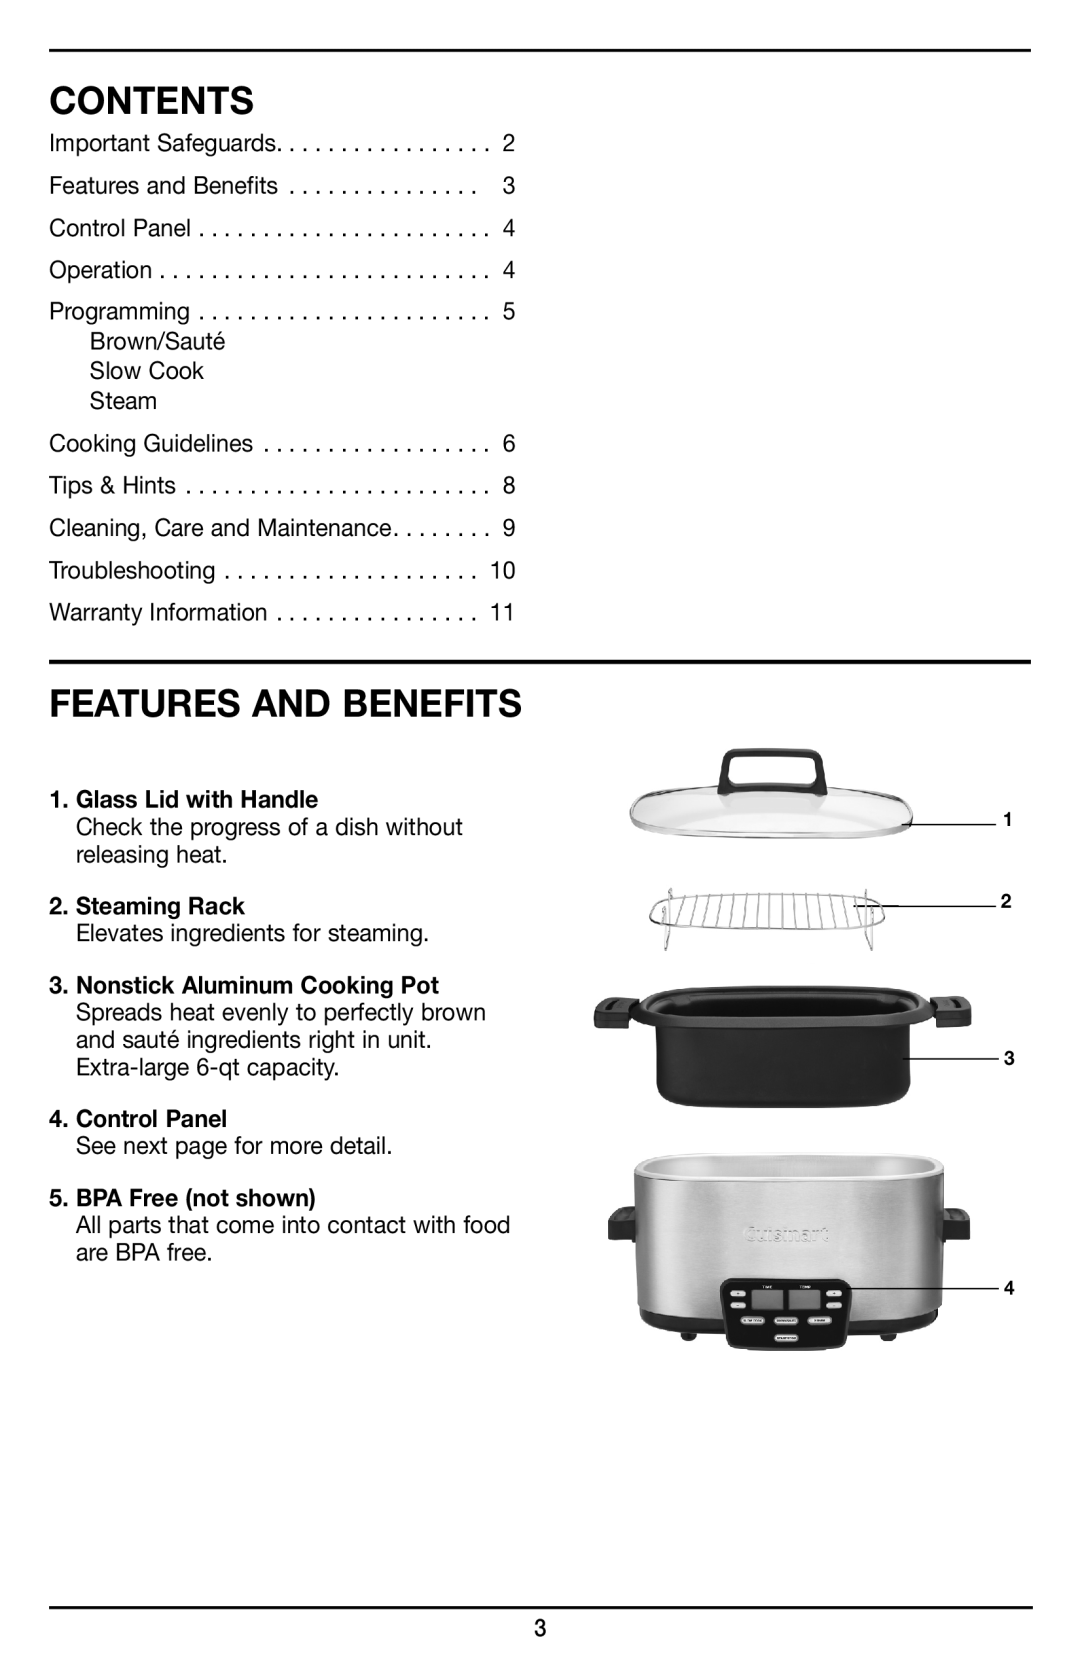 Cuisinart MSC-600 manual Contents, Features And Benefits 